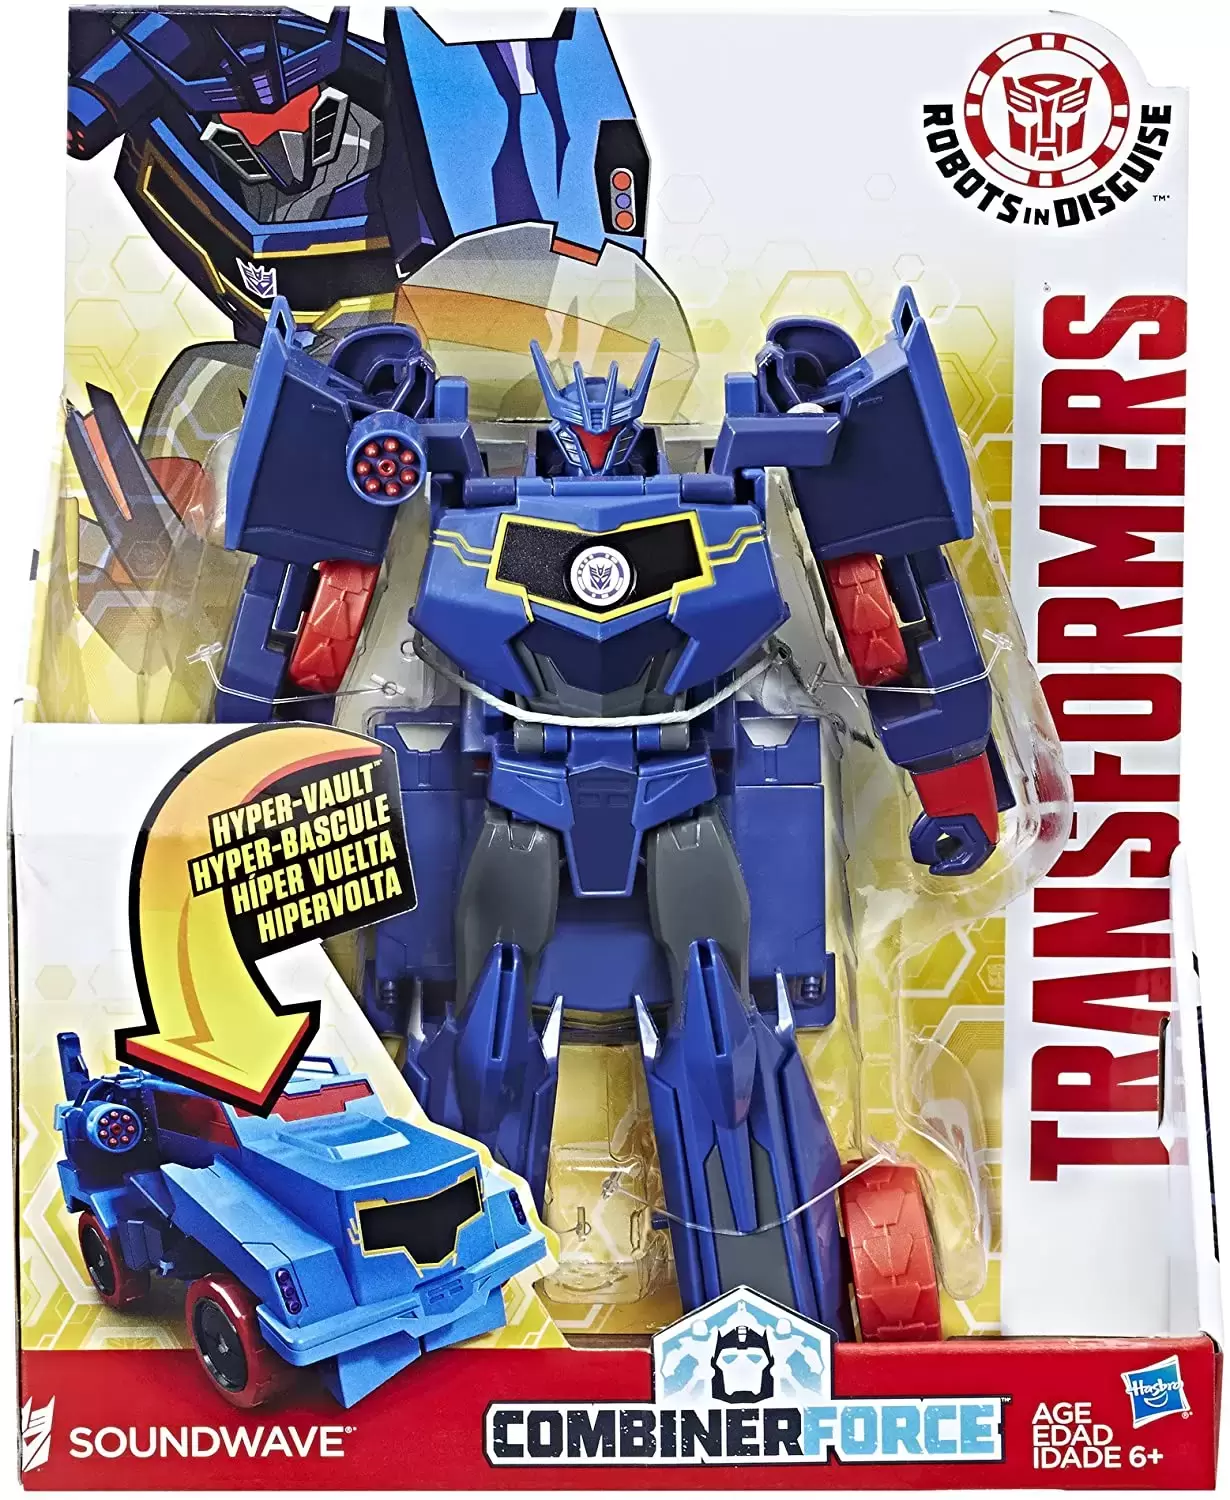 Transformers Robots in Disguise - Soundwave - Combiner Force